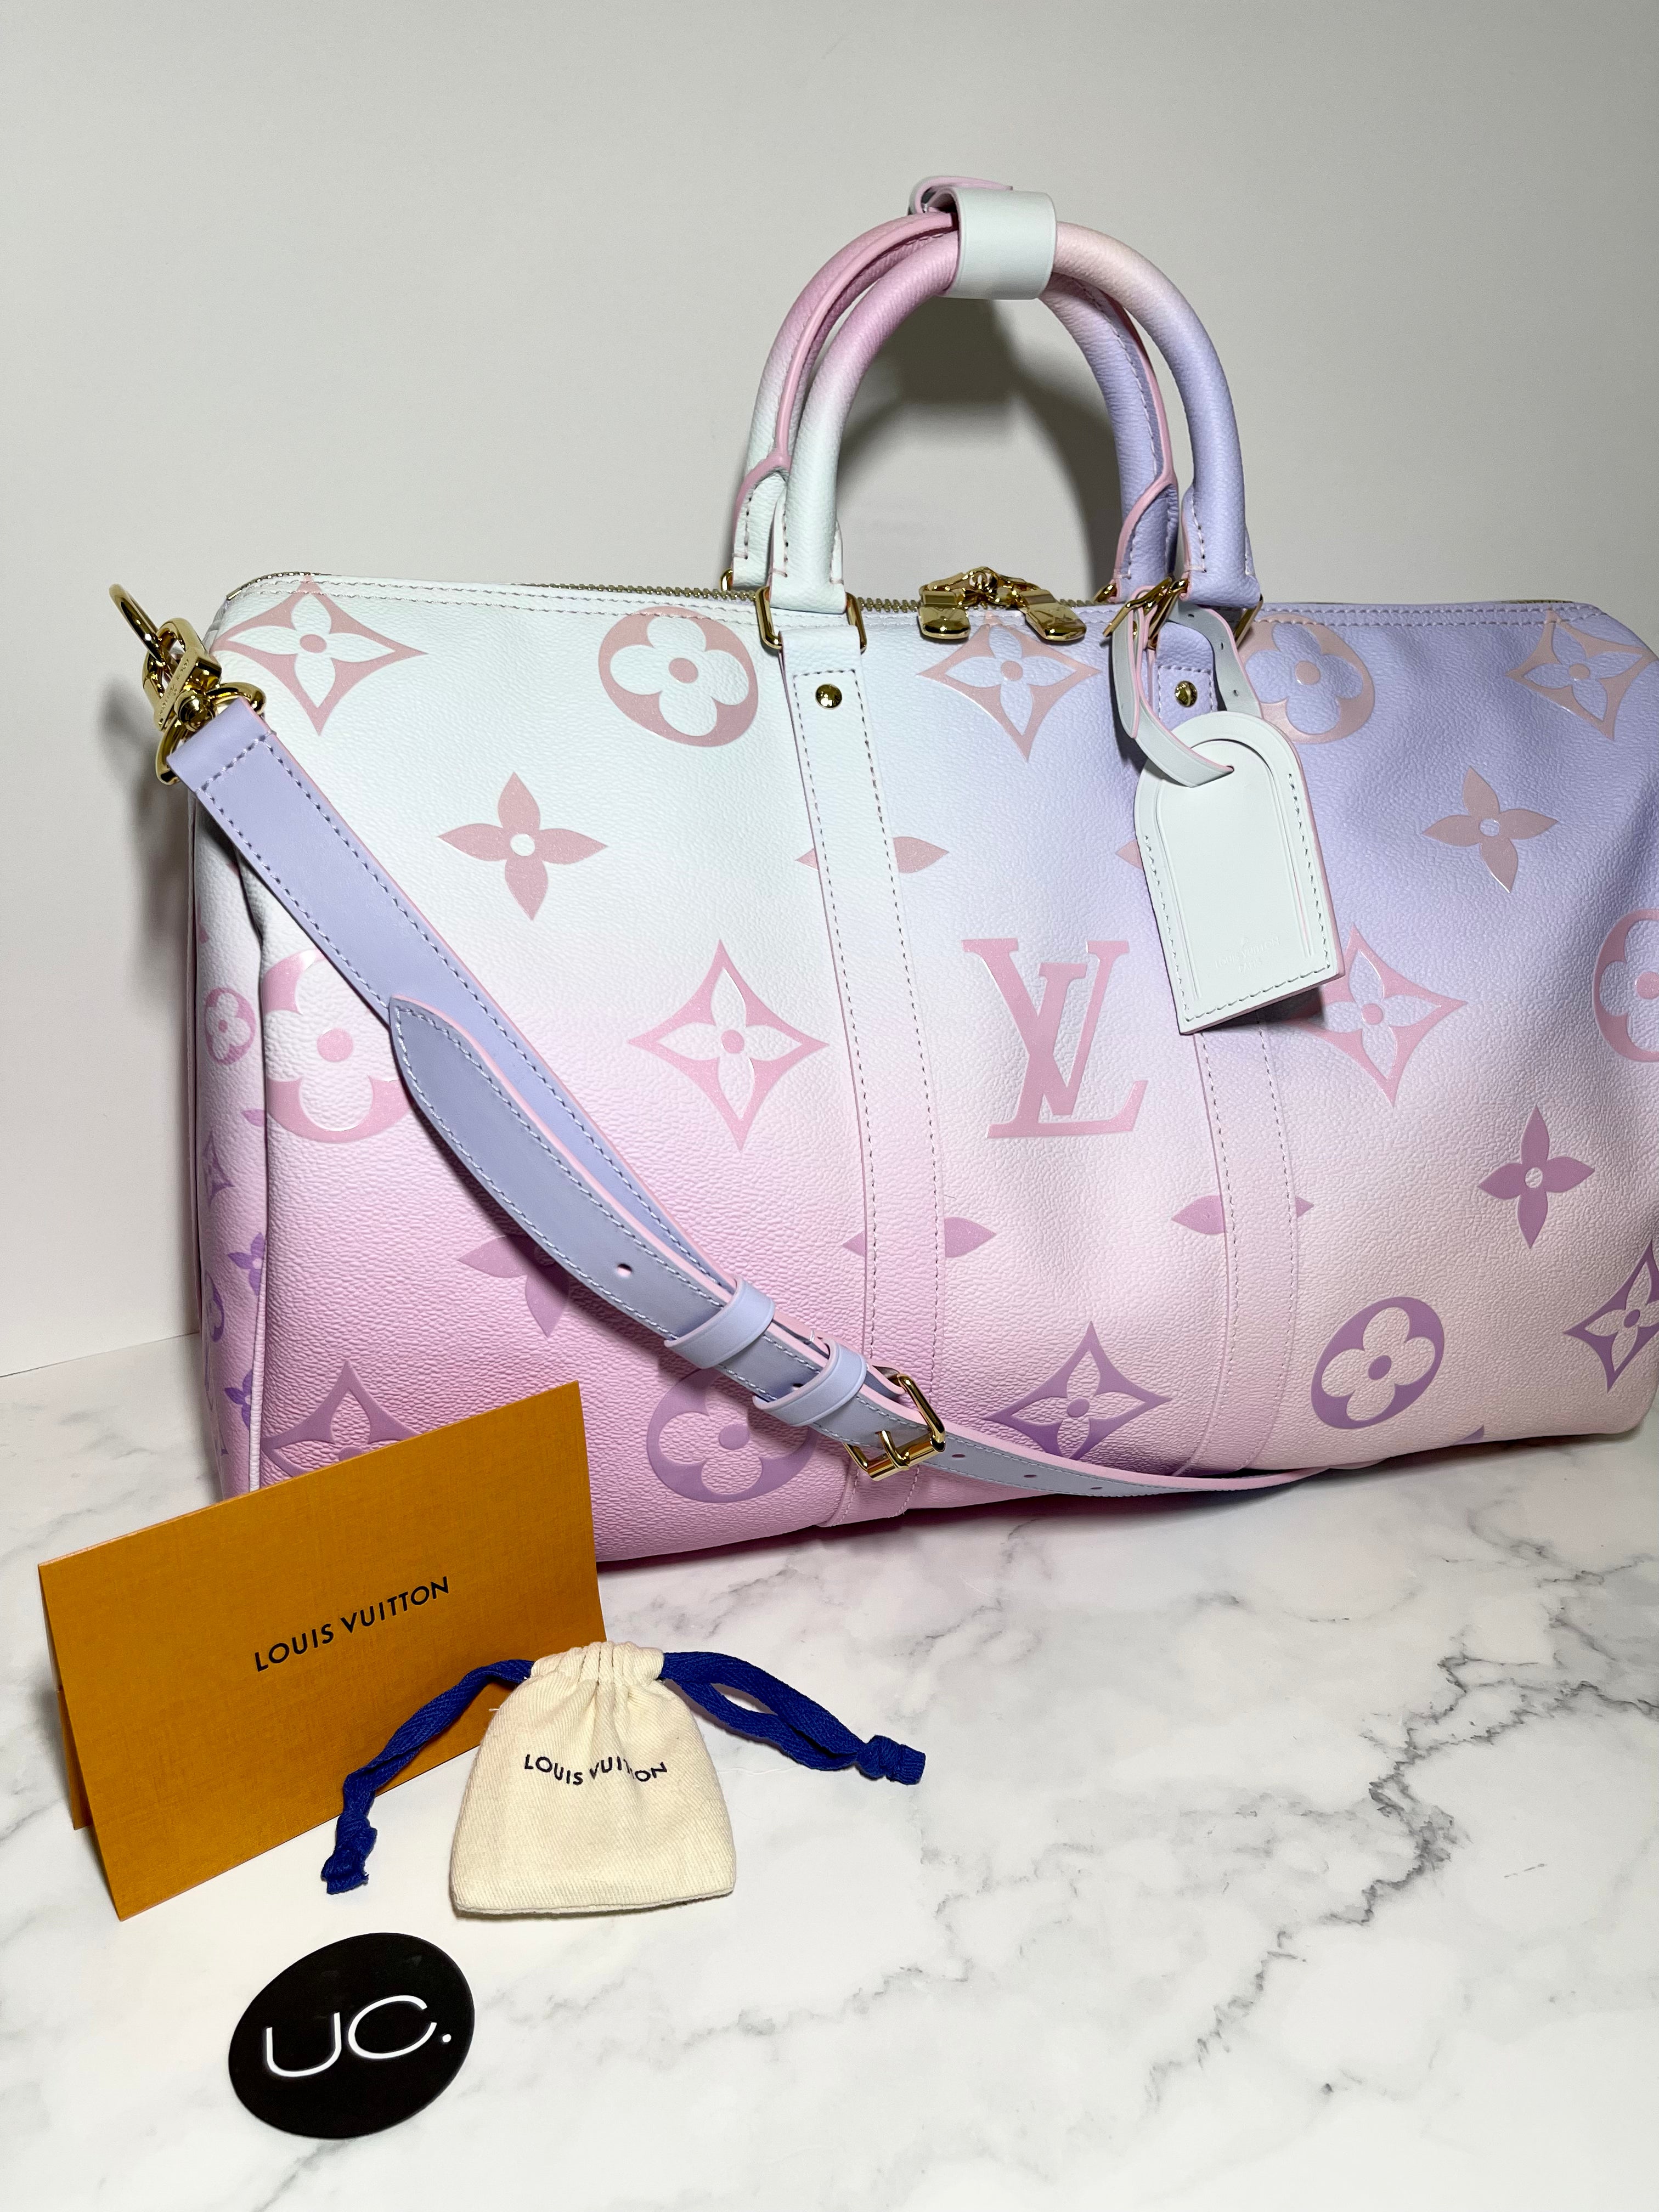 Welcome home to my new sunrise pastel keepall 45 from the Spring